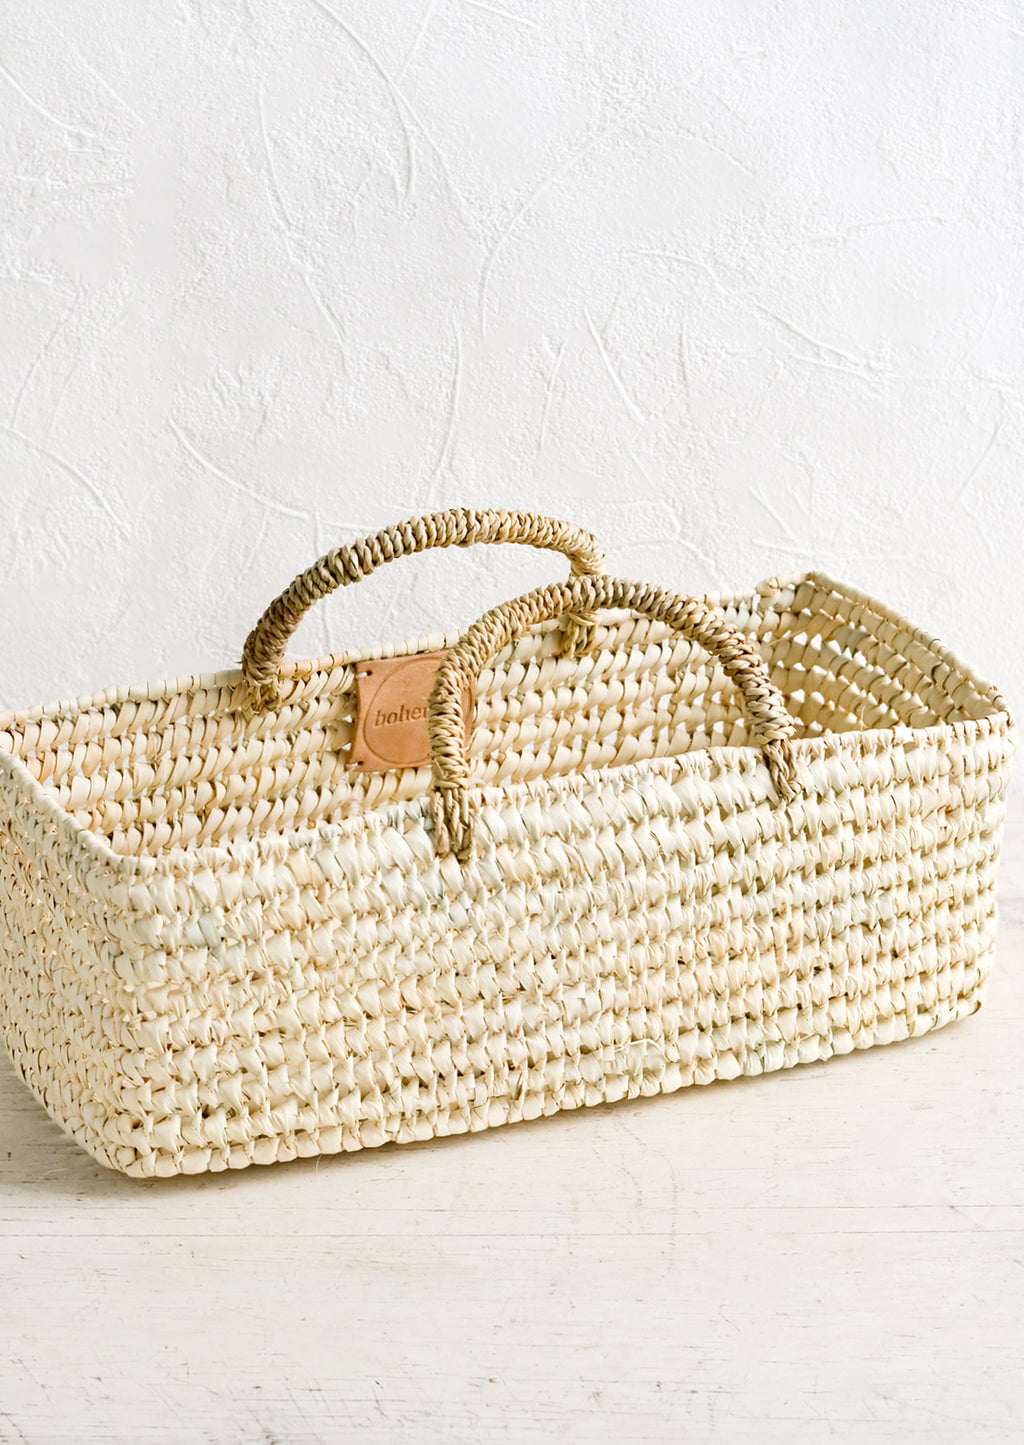 1: A skinny and narrow square storage basket with handles, made from natural dried palm.